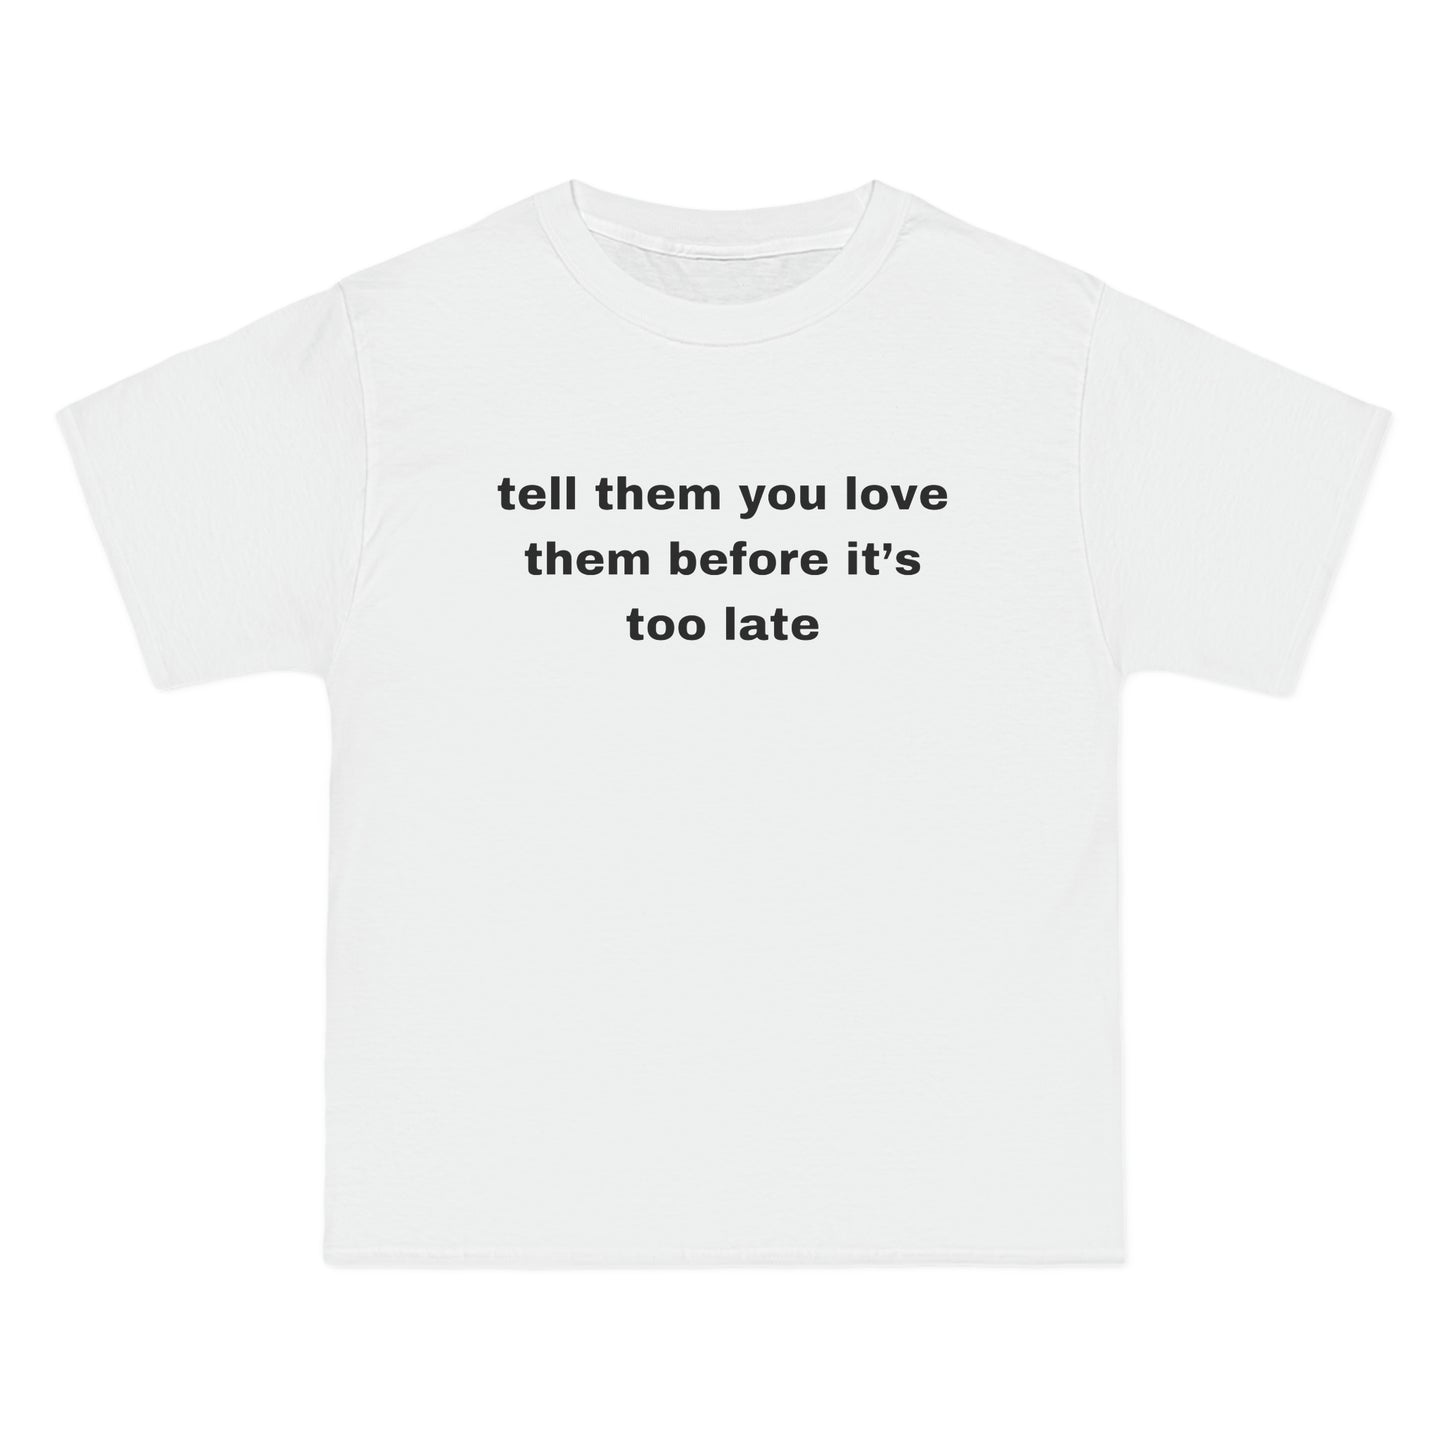 tell them you love them before it's too late Tee